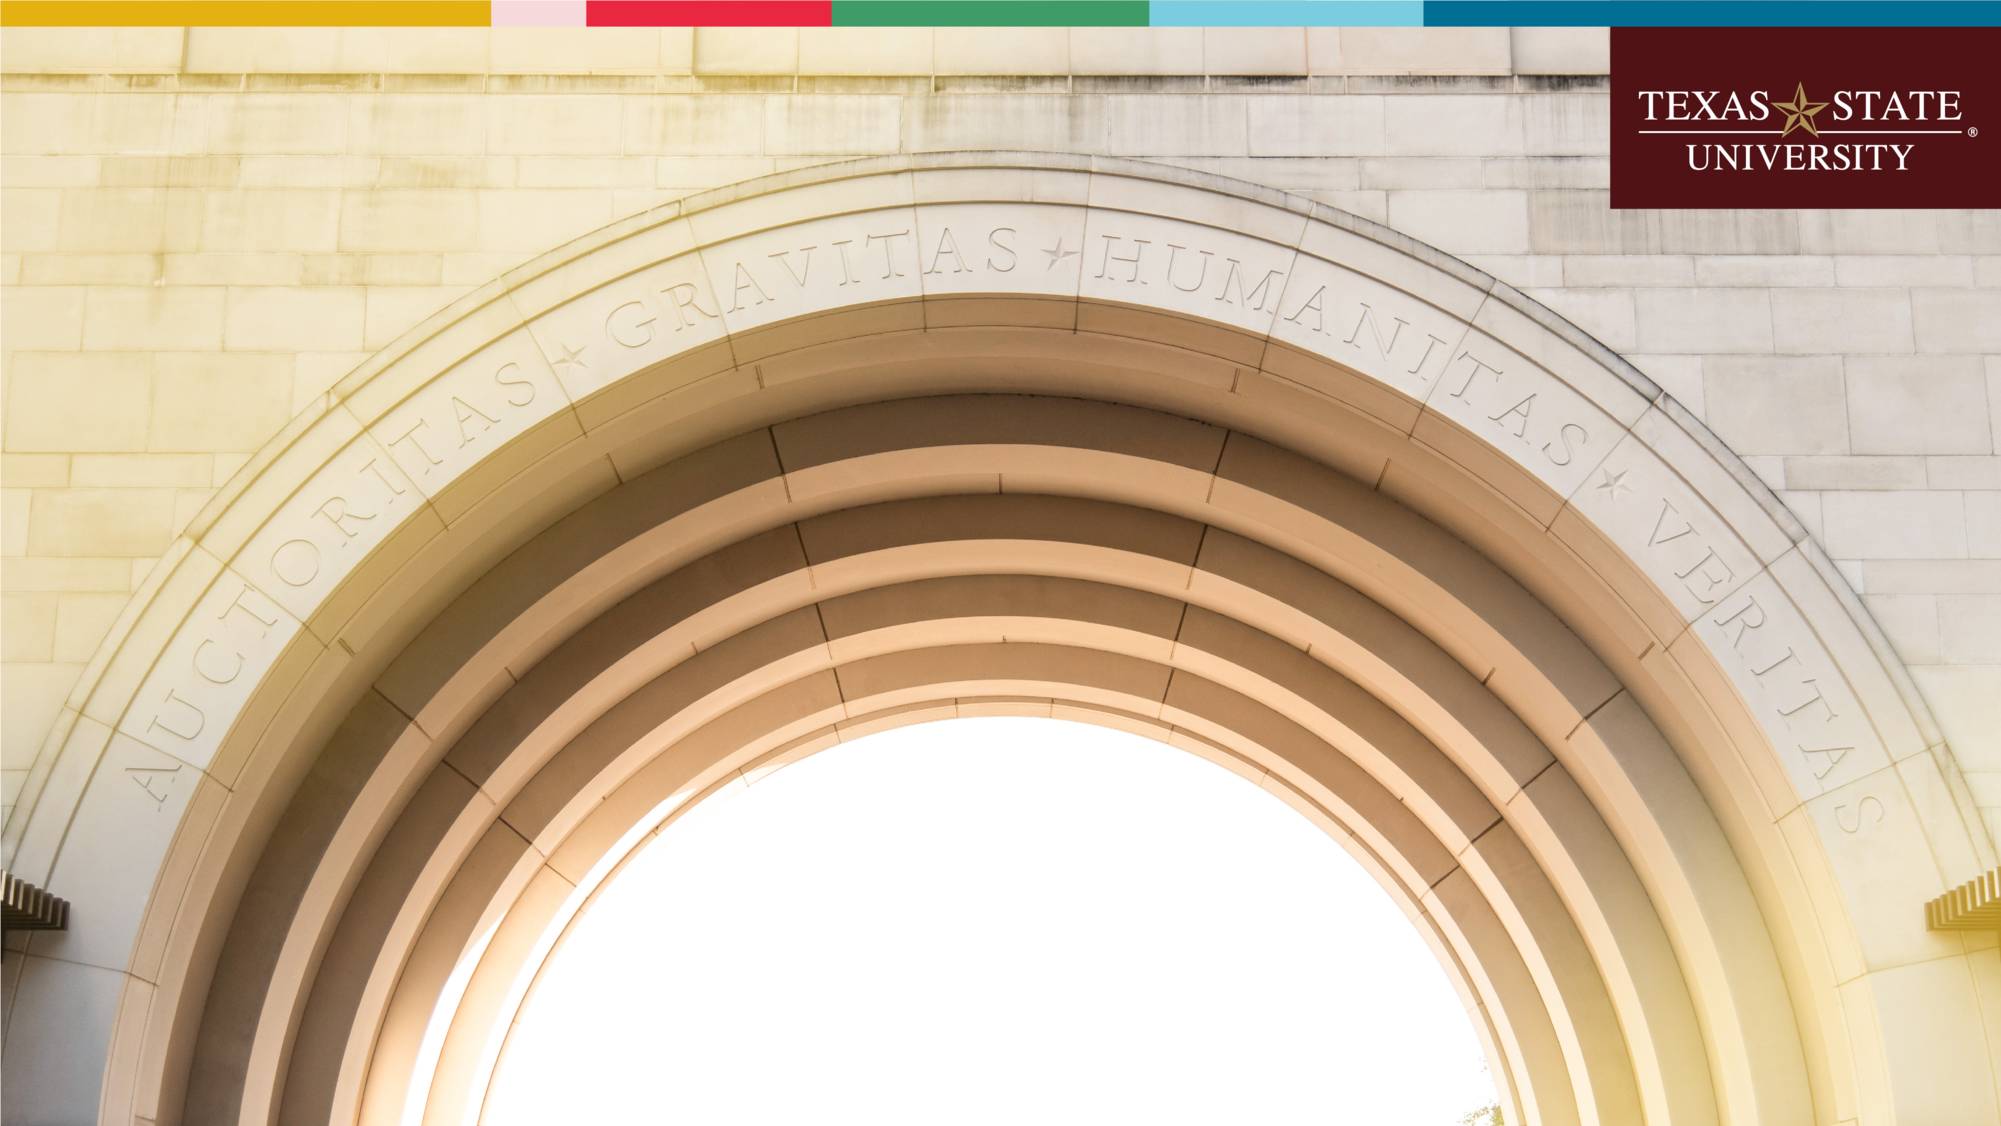 Arch of the Undergraduate Academic Center with logo and colorbar elements